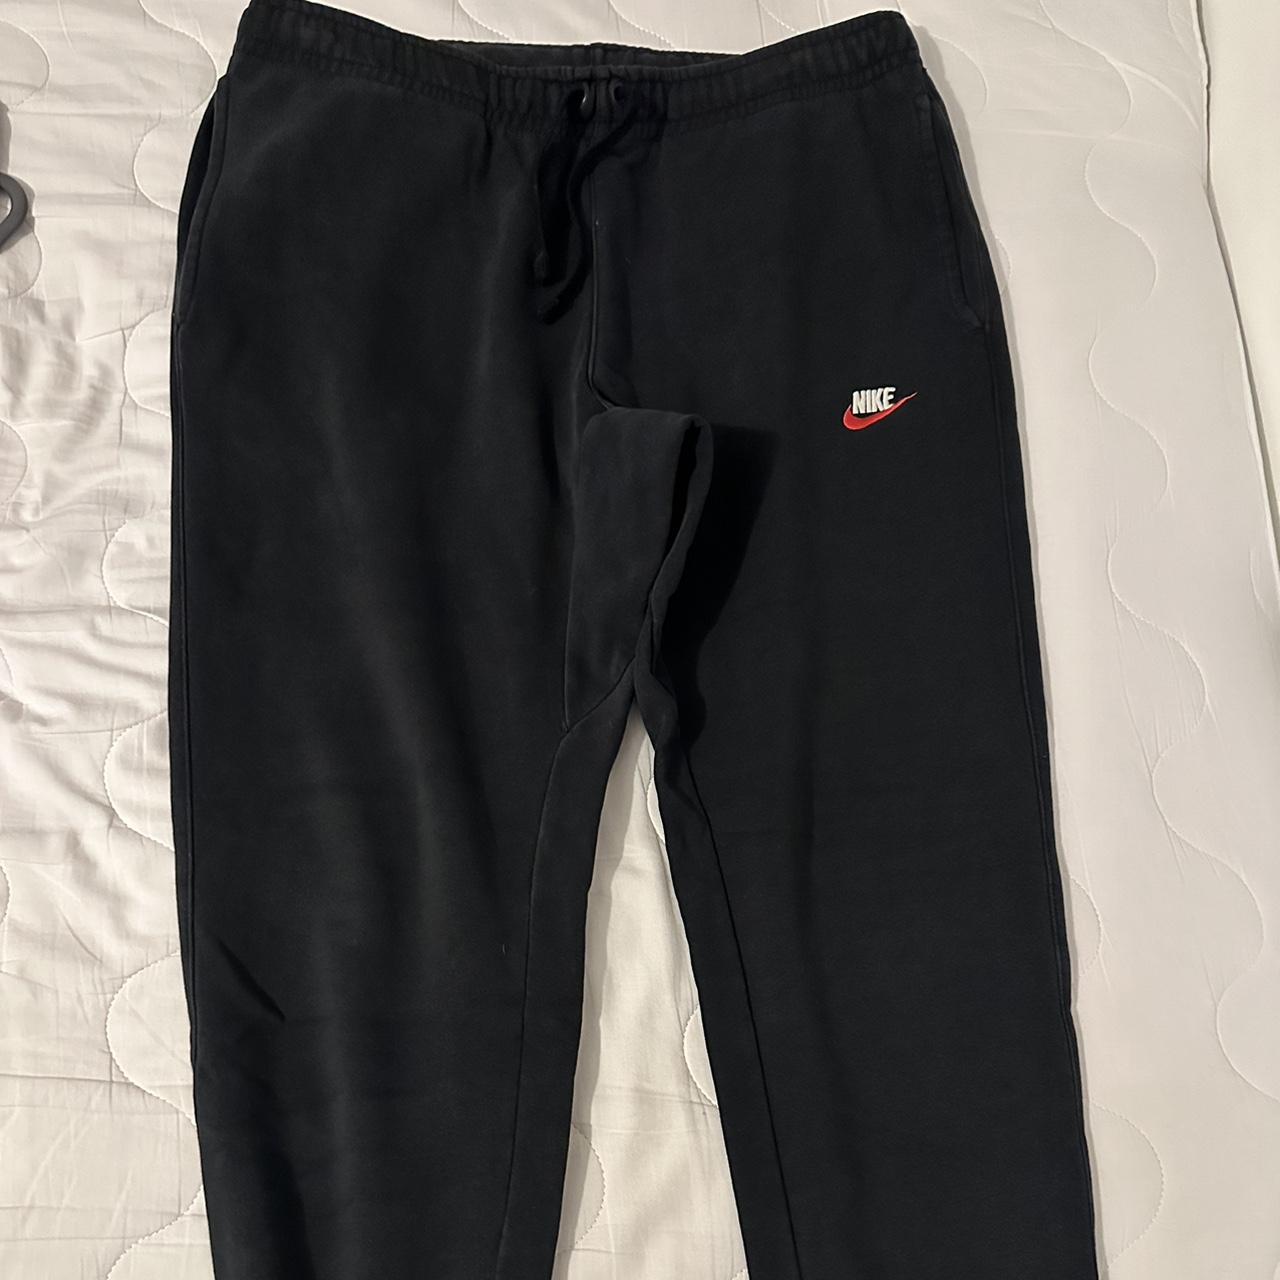 Large Men’s Black Nike Club Joggers with Red & White... - Depop